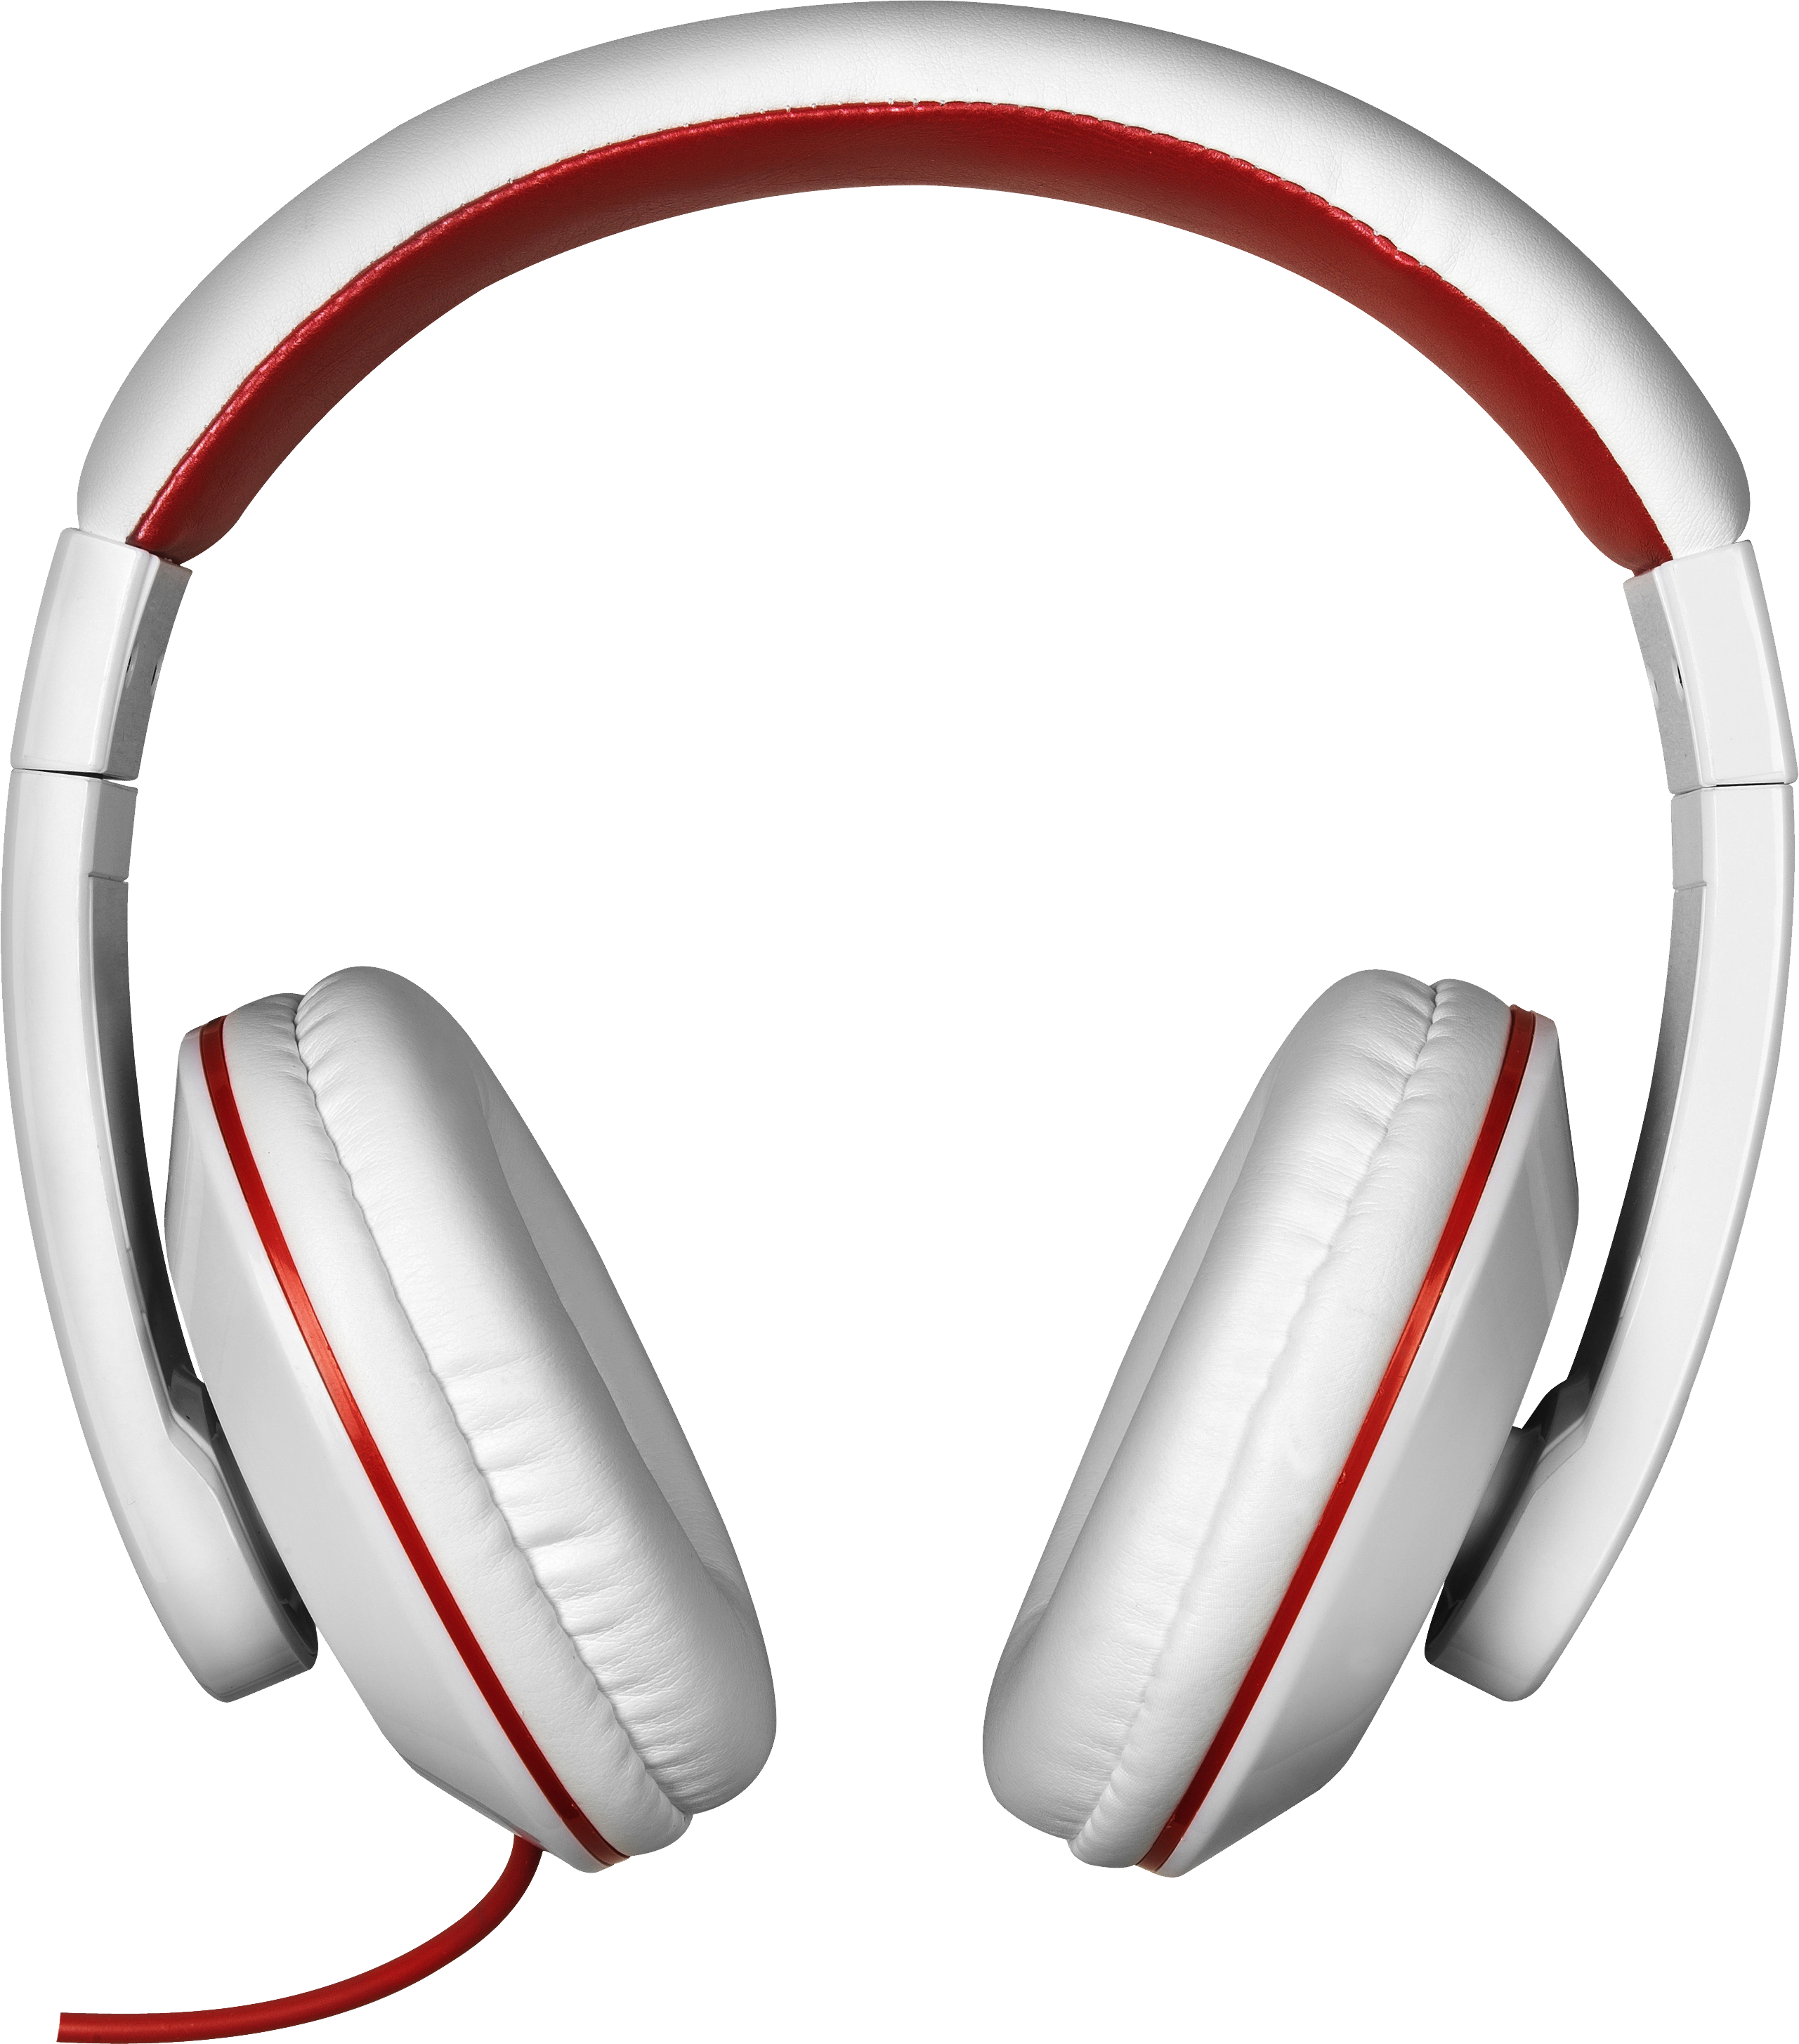 Mobile Earphone PNG Image High Quality PNG Image